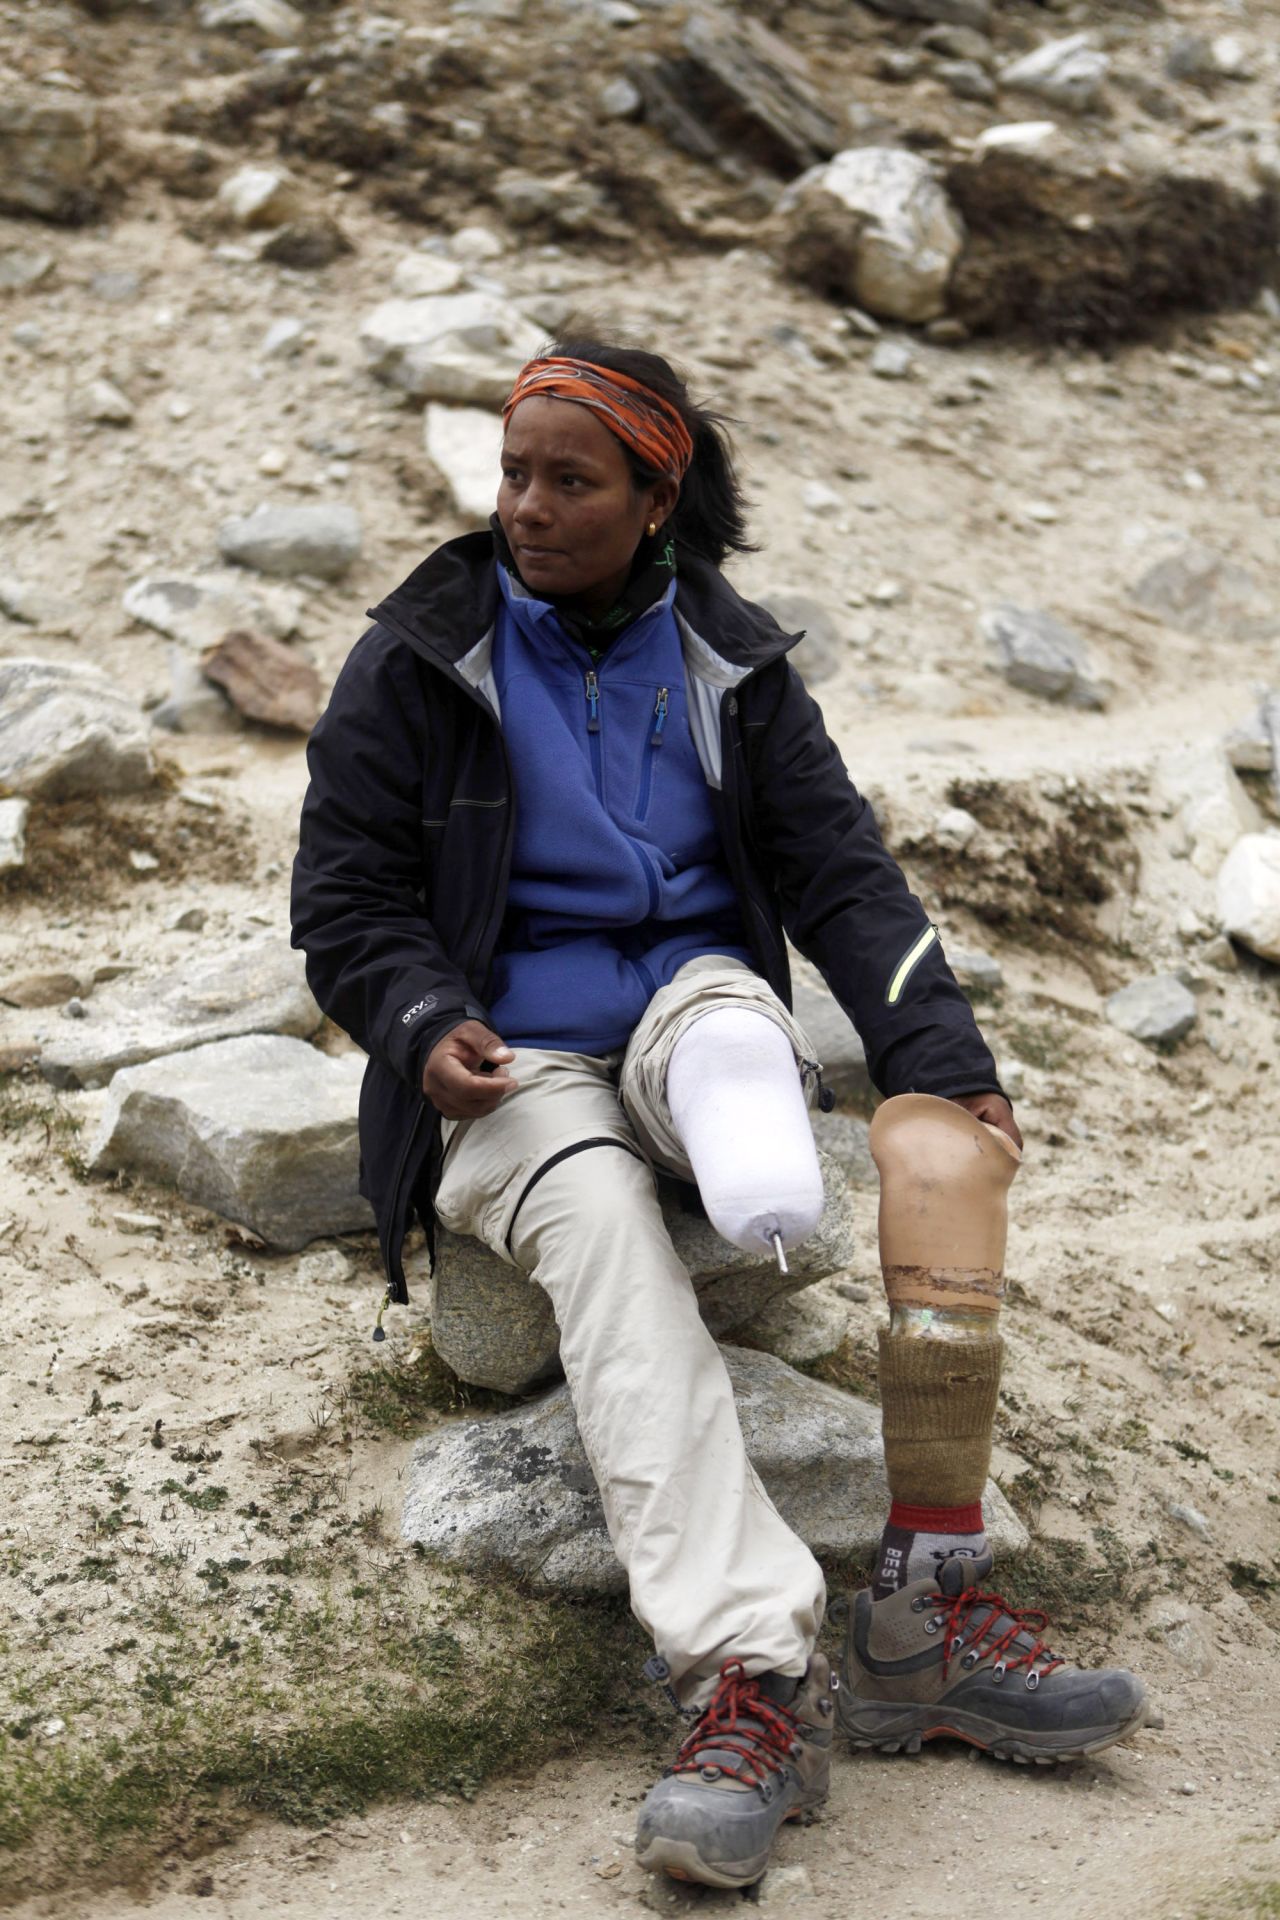 Indian mountaineer Arunima Sinha, who had her leg amputated below the left knee after she was thrown from a moving train, became the <a href="http://www.thehindu.com/news/national/arunima-is-first-woman-amputee-to-scale-everest/article4736281.ece" target="_blank" target="_blank">first female amputee to conquer Everest</a> in May 2013.